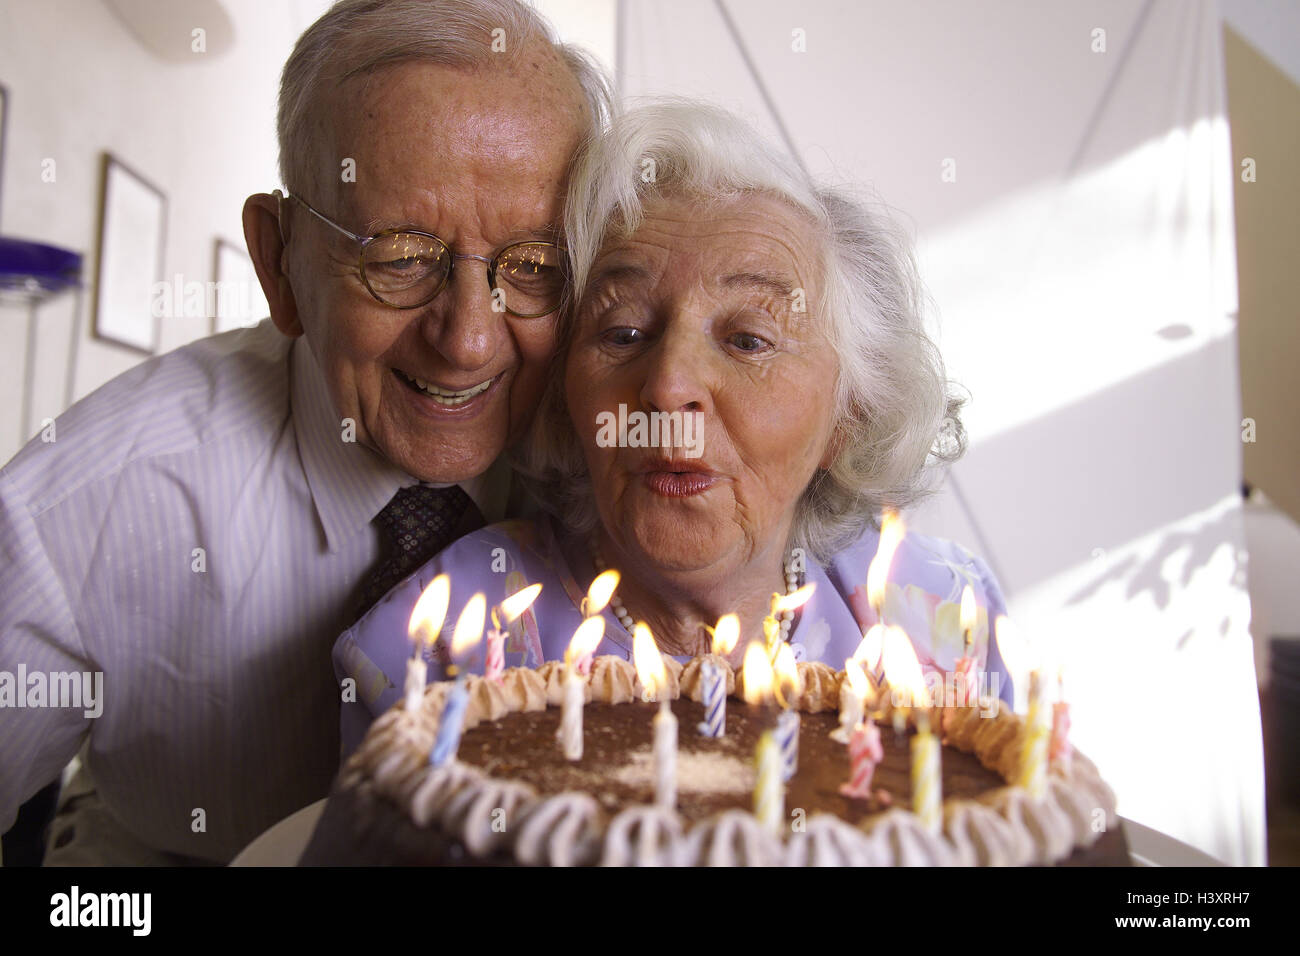 Senior citizen's couple, birthday cake, candles blow out, joy, luck, portrait, senior citizens, couple, pensioner, old person, 70-80 years, homes, partnership, friendship, luck, harmony, happily, falls in love, celebrate carefree, contently, actively, together, common characteristic, closeness, love, affection, tenderness, surprise, birthday surprise, birthday, birthday cake, cake, cake, birthday candles, wish, Stock Photo